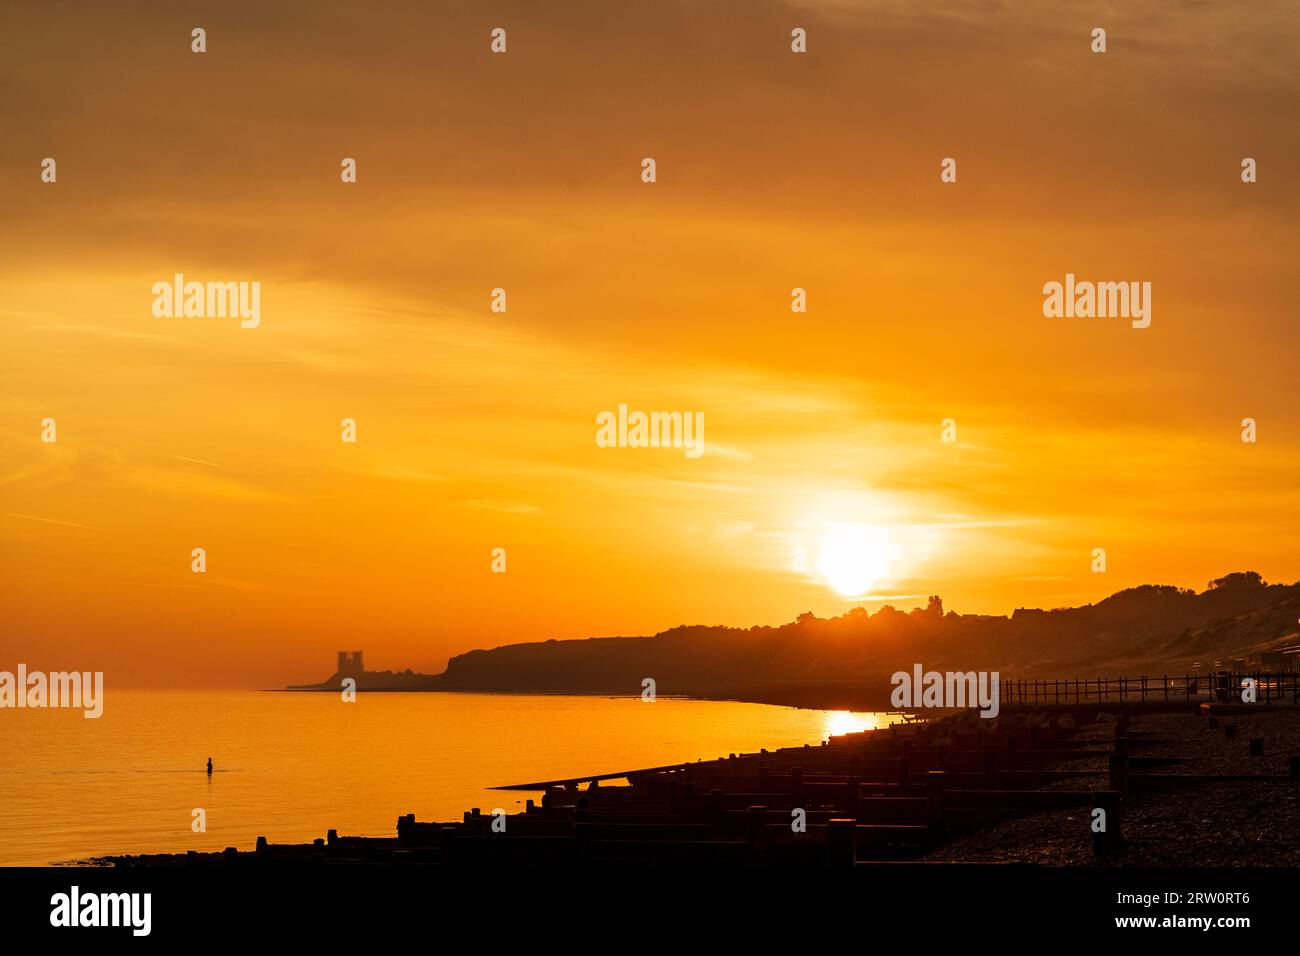 Sunrise at Herne Bay in Kent. Orange sky and sea with the bright sun appearing above silhouetted coastline. In the distance, the landmark twin towers of the ruins of the Angelo Saxon church at Reculver. Breakwaters along the beach, very calm sea. Stock Photo